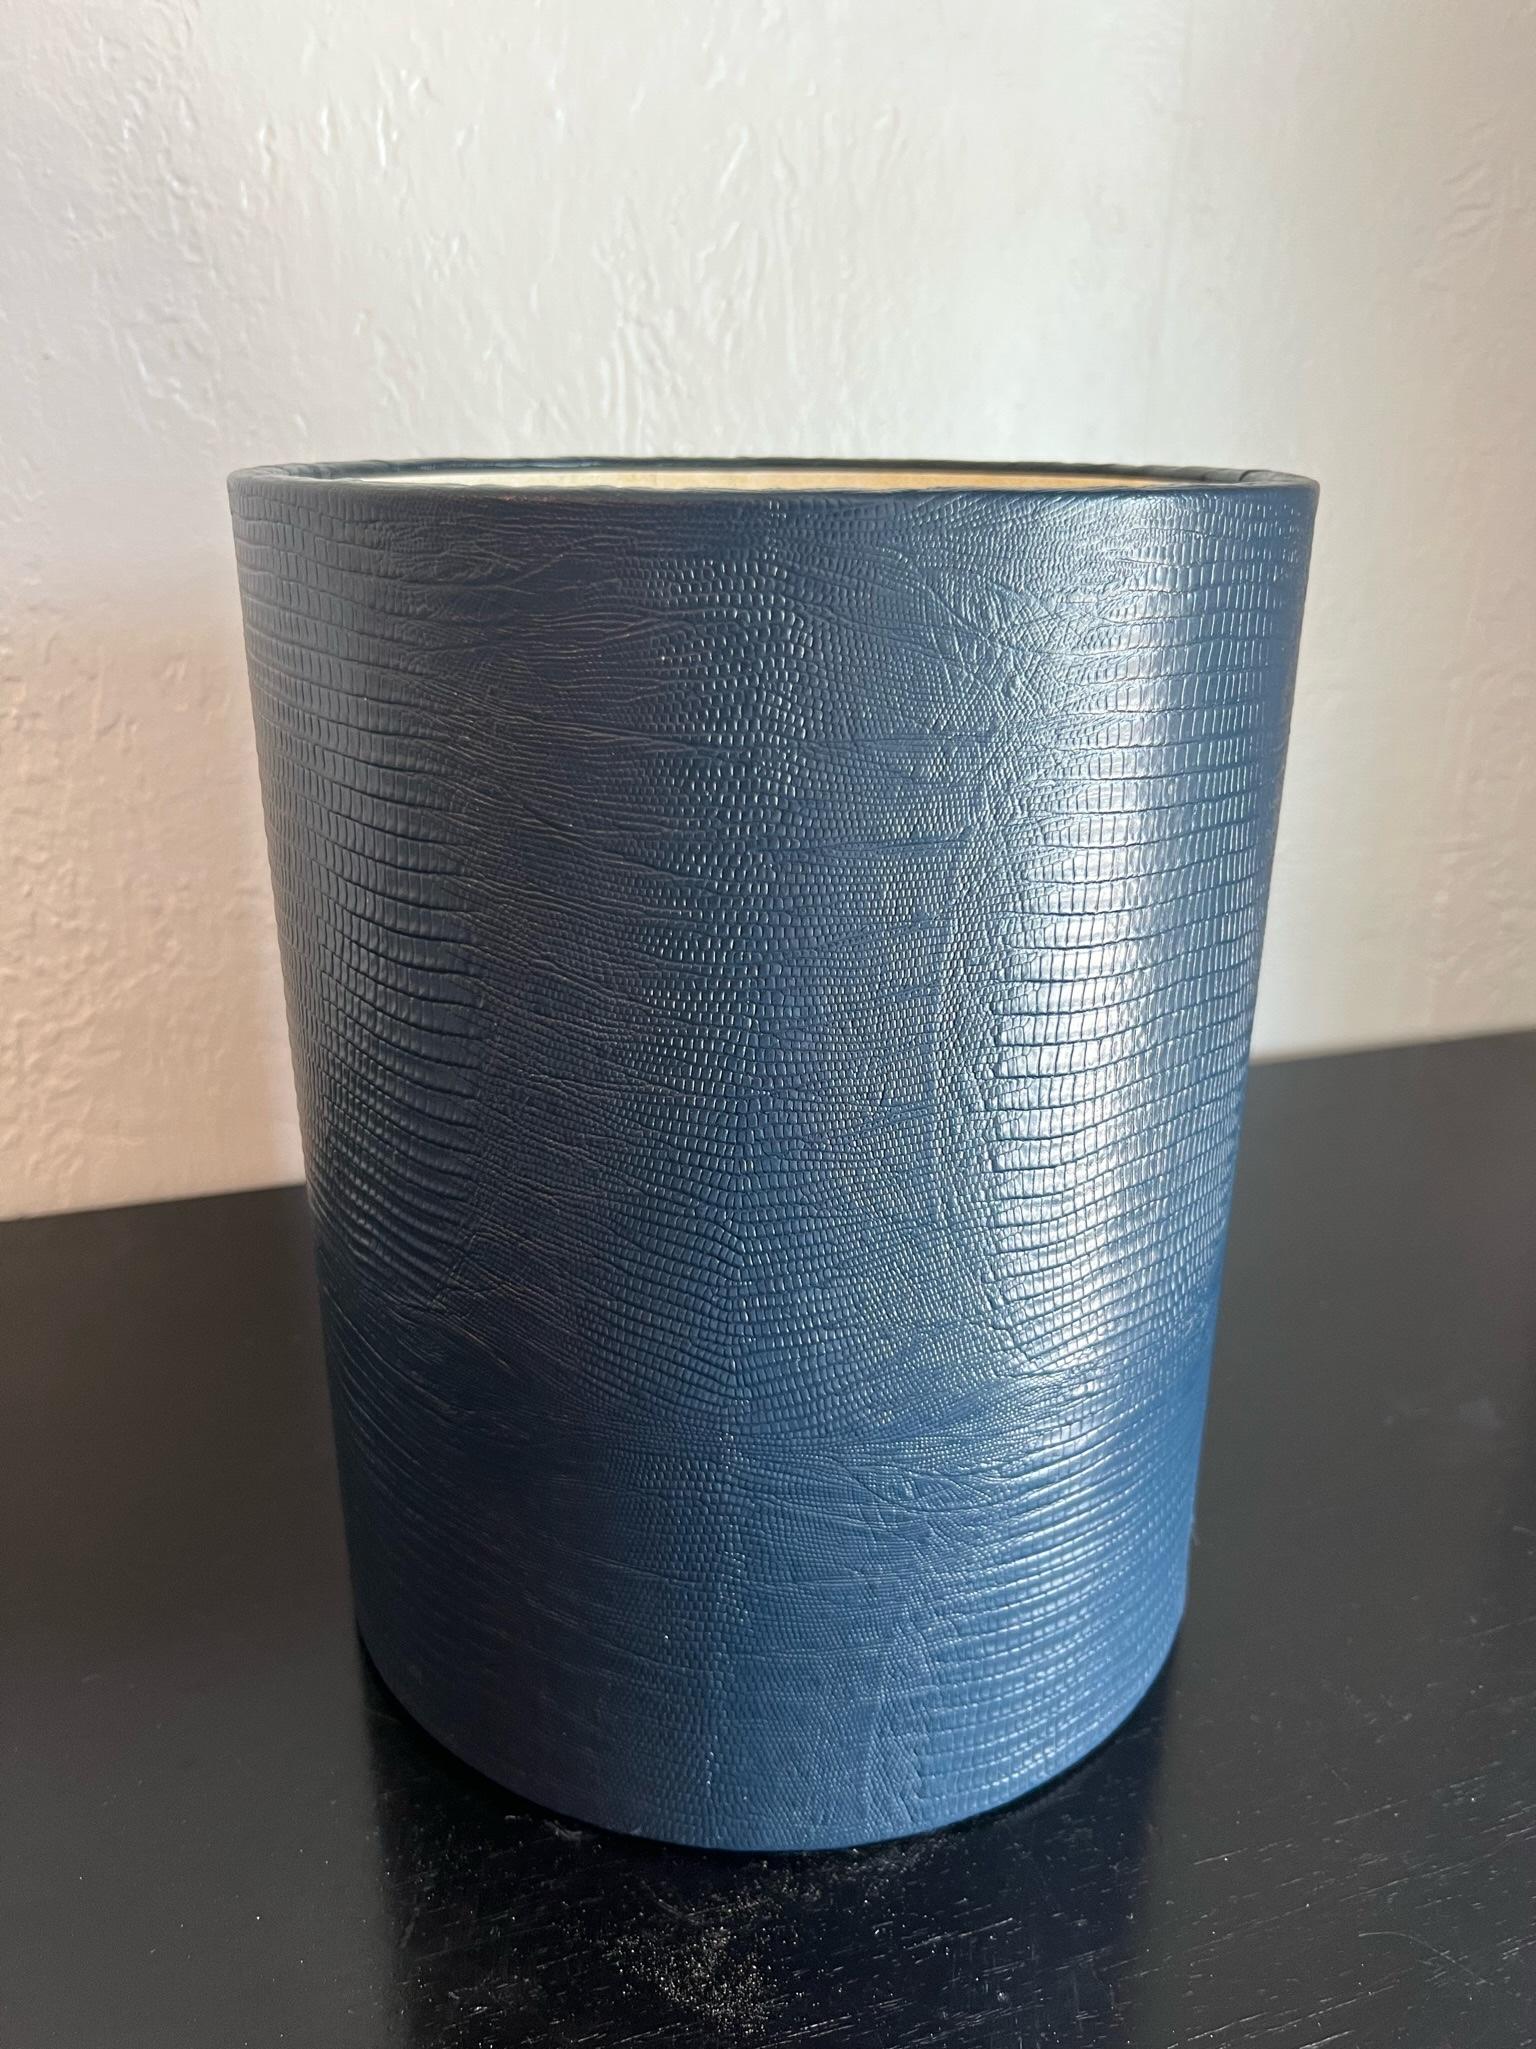 Karl Springer style faux snakeskin waste basket. Embossed faux snakeskin in a navy blue tone. 

Would work well in a variety of interiors such as modern, mid century modern, Hollywood regency, etc. Piece blends seamlessly with other designers such